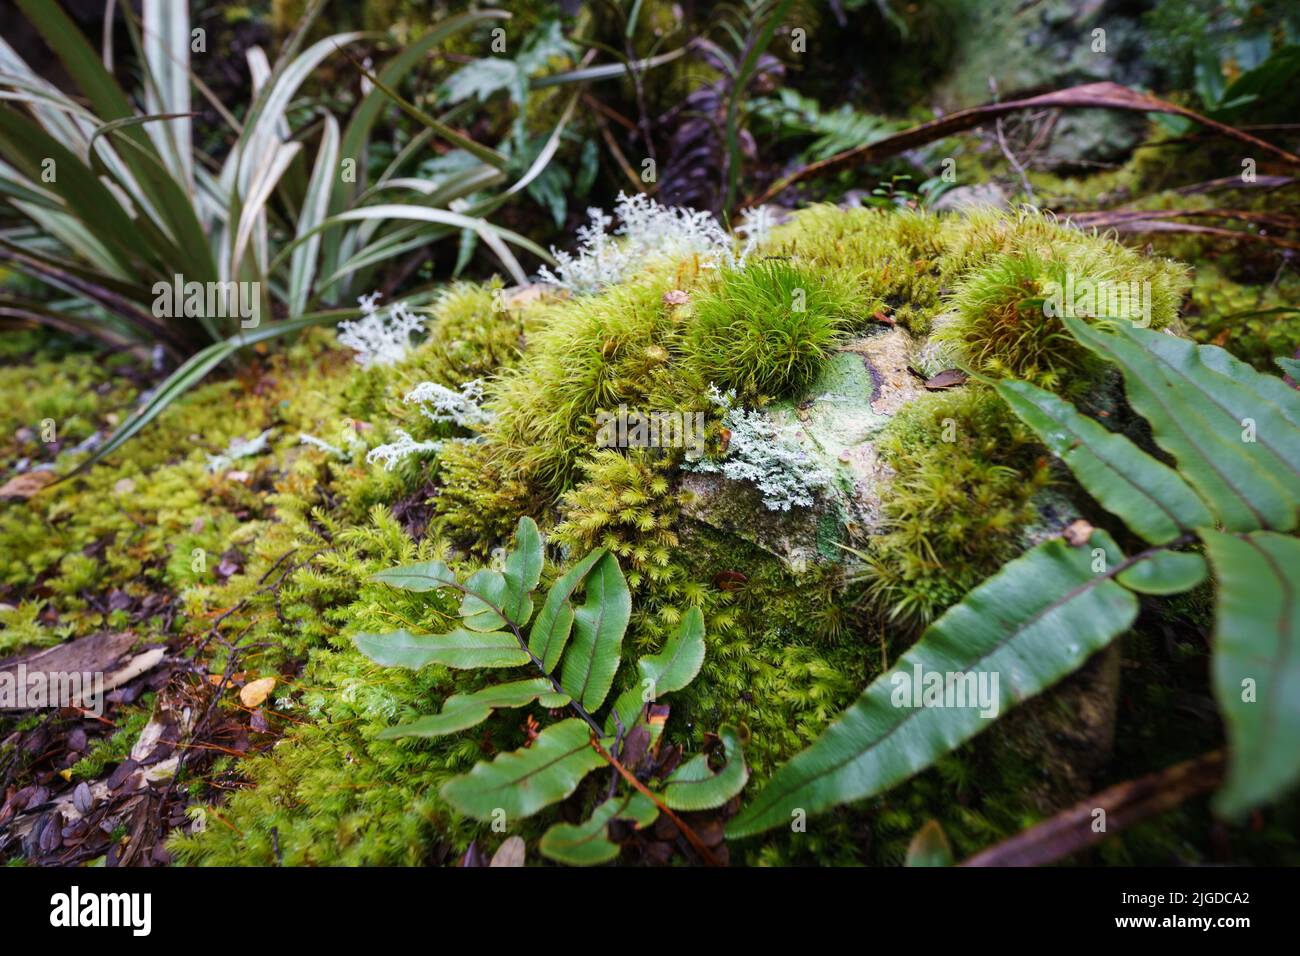 Amazing selection small plants, ferns and mosses in Micro-landscape on Southern Alps rainforest floor, Bealey bush walk. Stock Photo